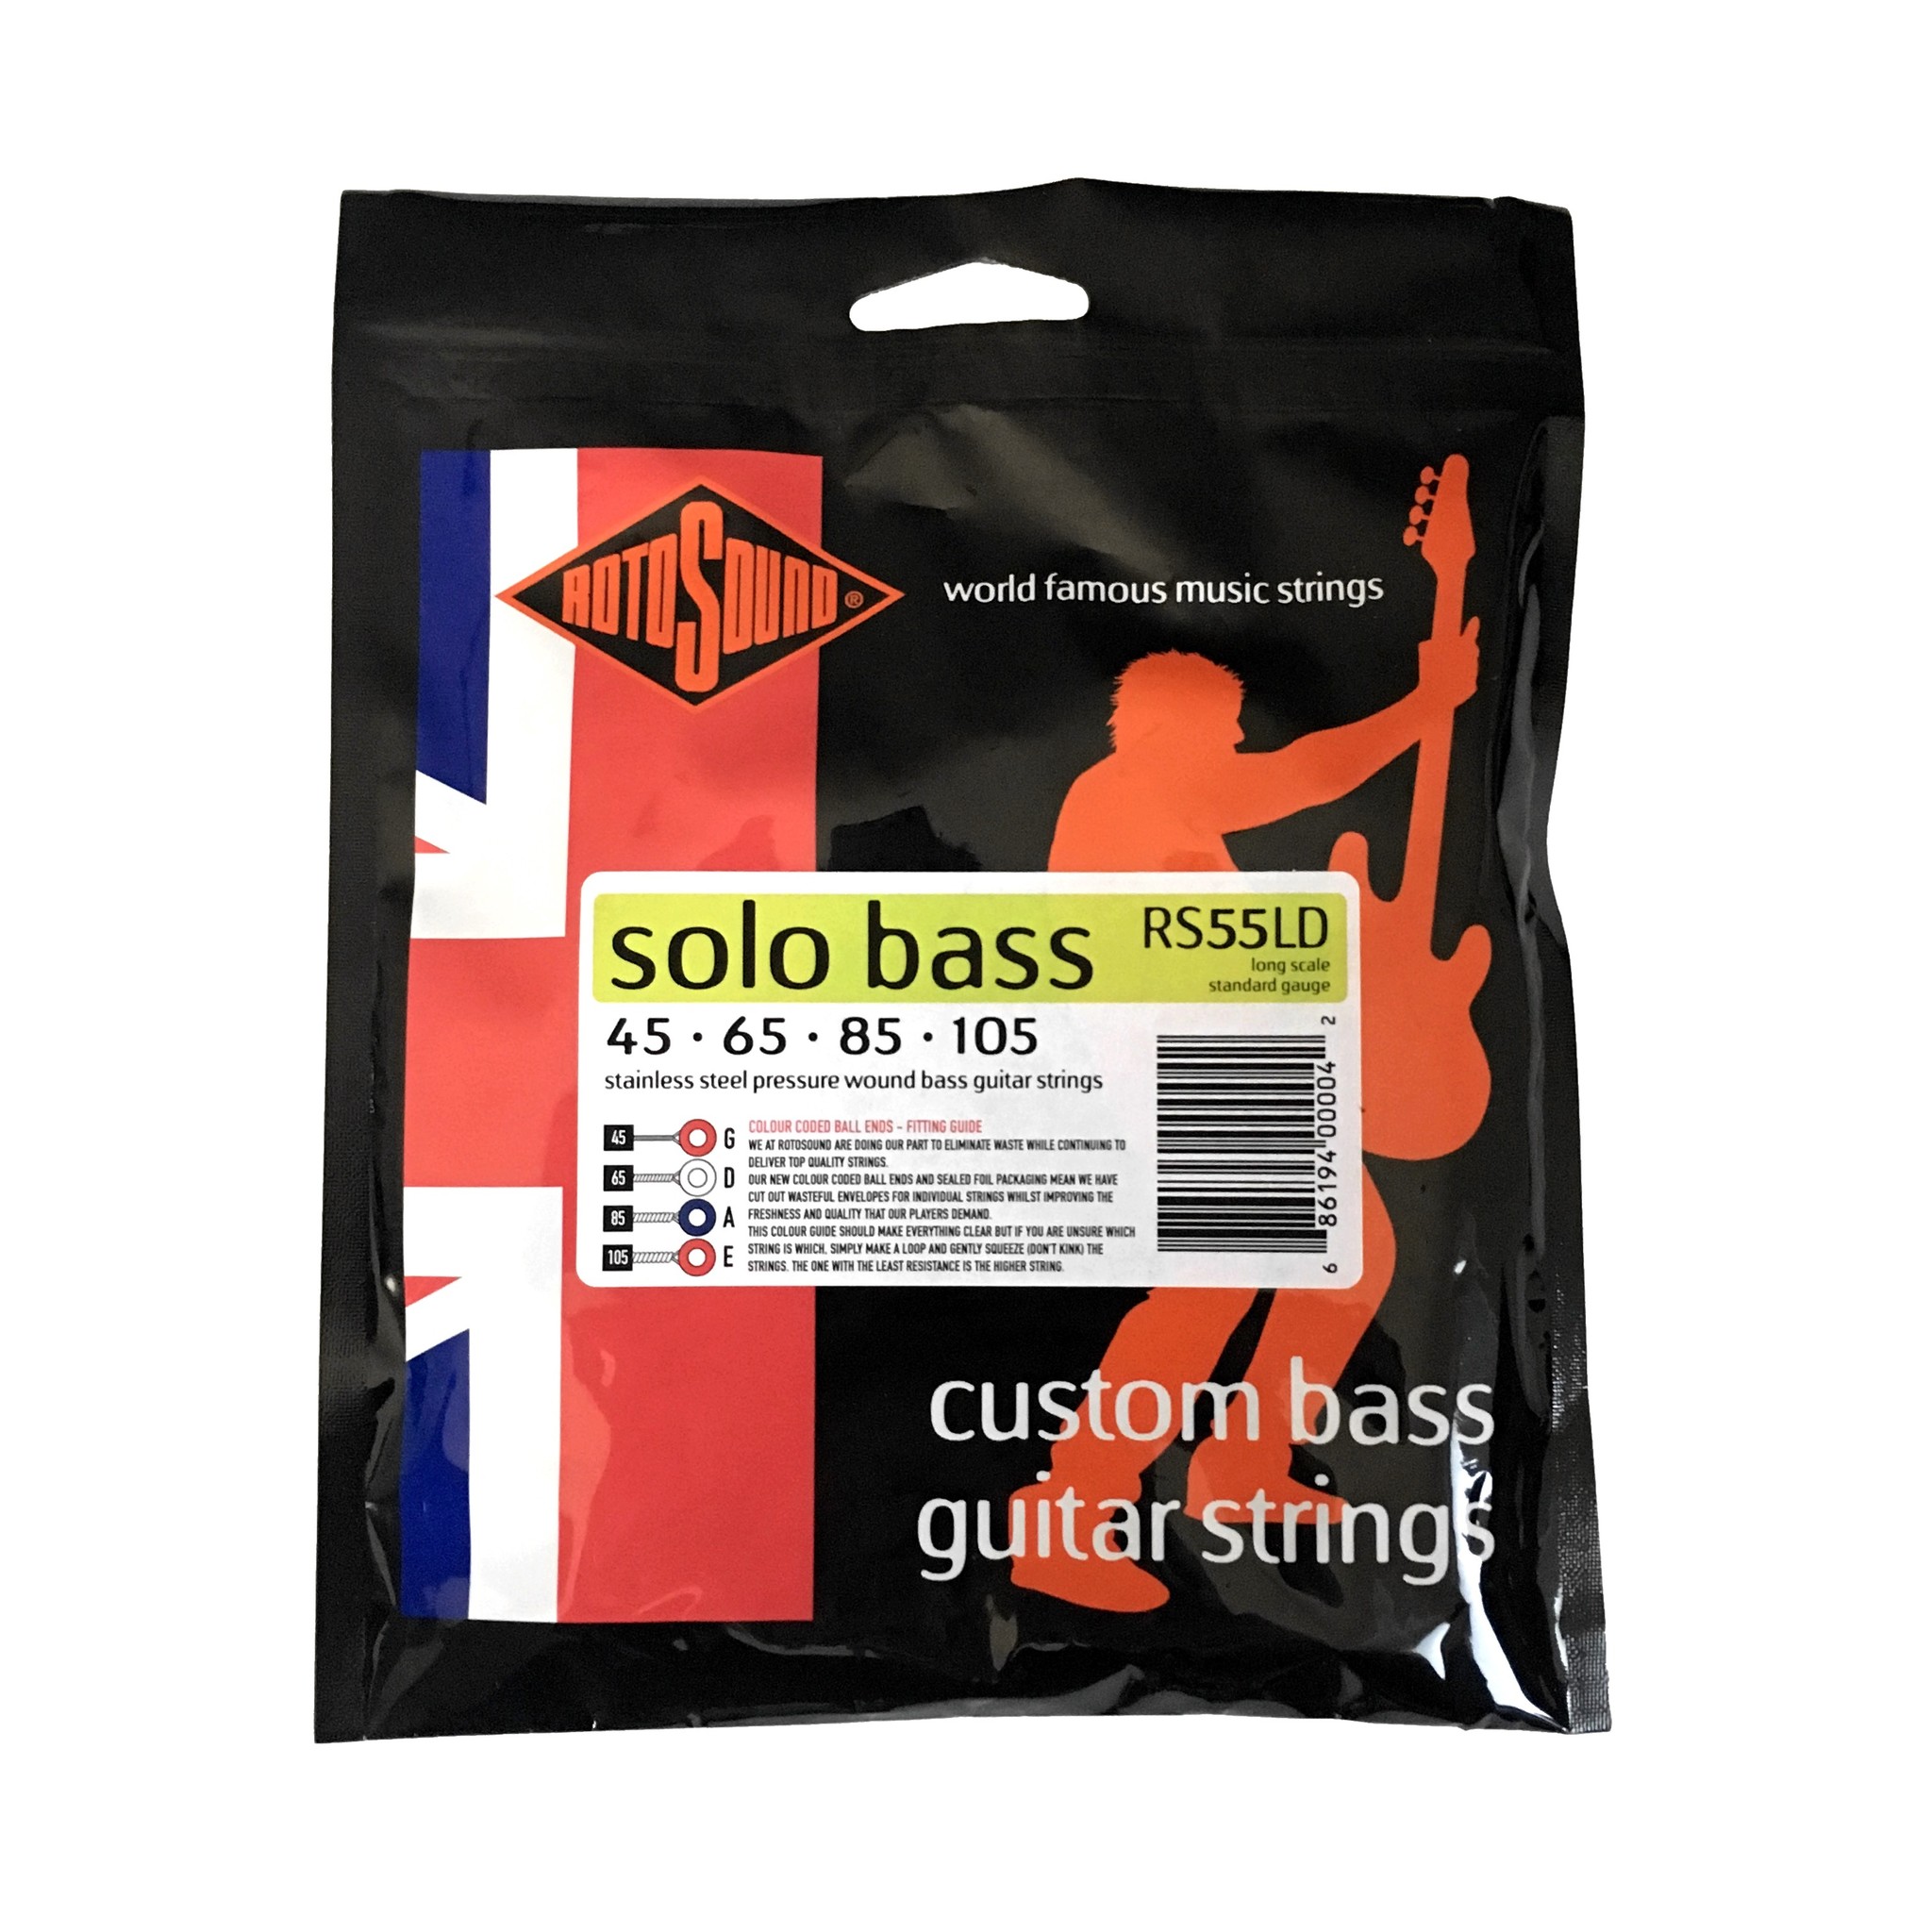 Rotosound RS55LD Solo Bass 55, Stainless Steel Pressure Wound, Custom Bass Guitar Strings